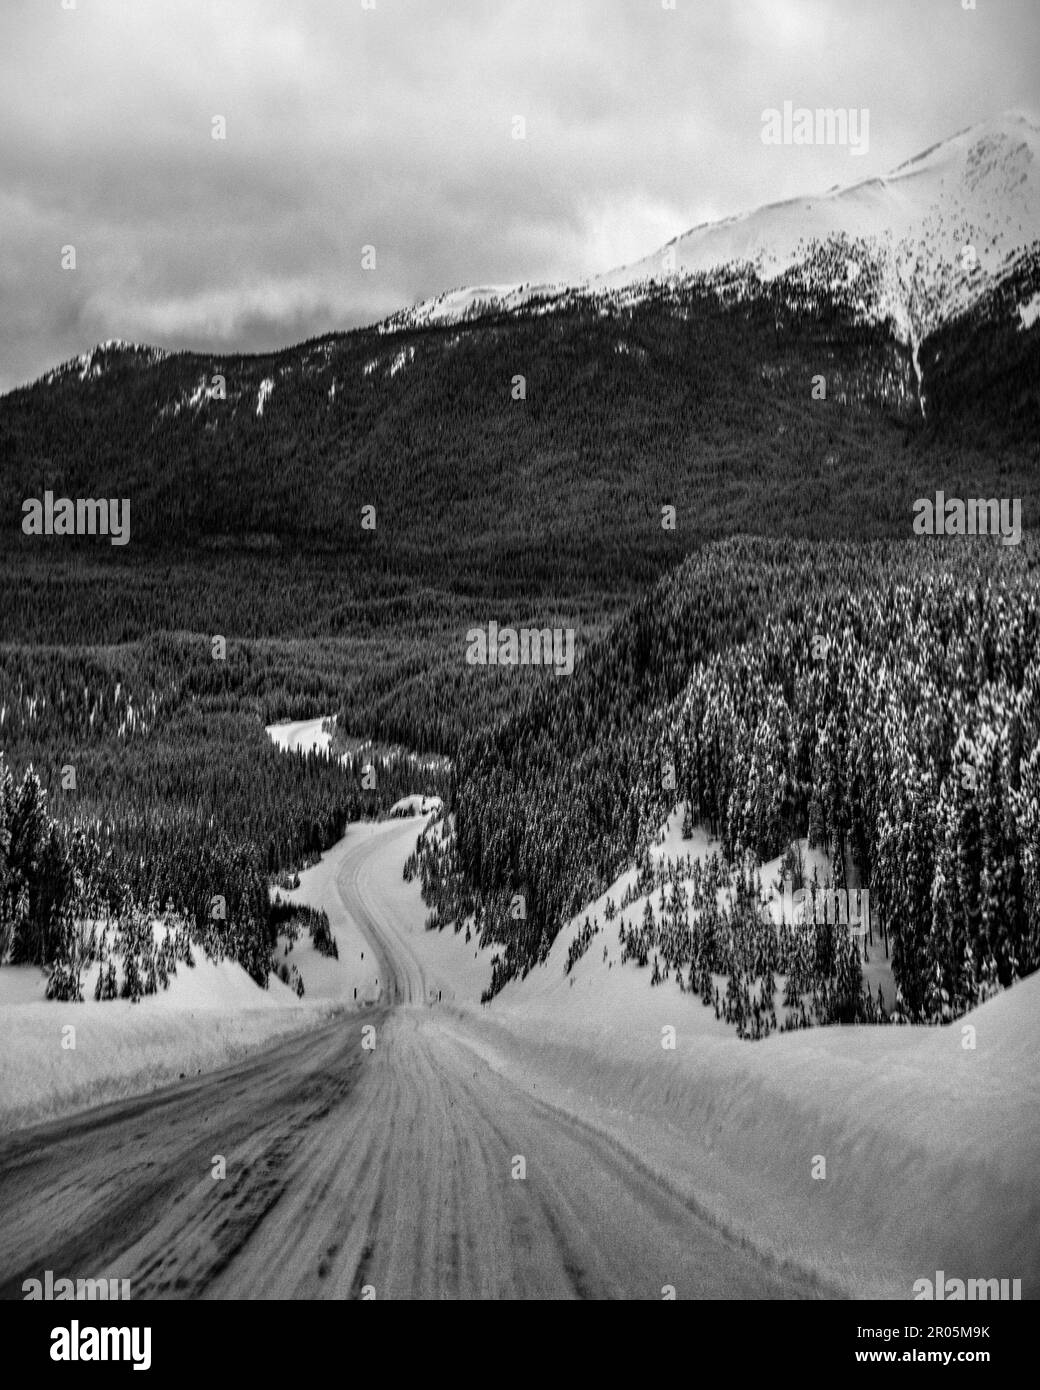 Black and white portrait view along the Alaska Highway in winter time with snow capped mountains and road running towards perfect snowy scenery. Stock Photo